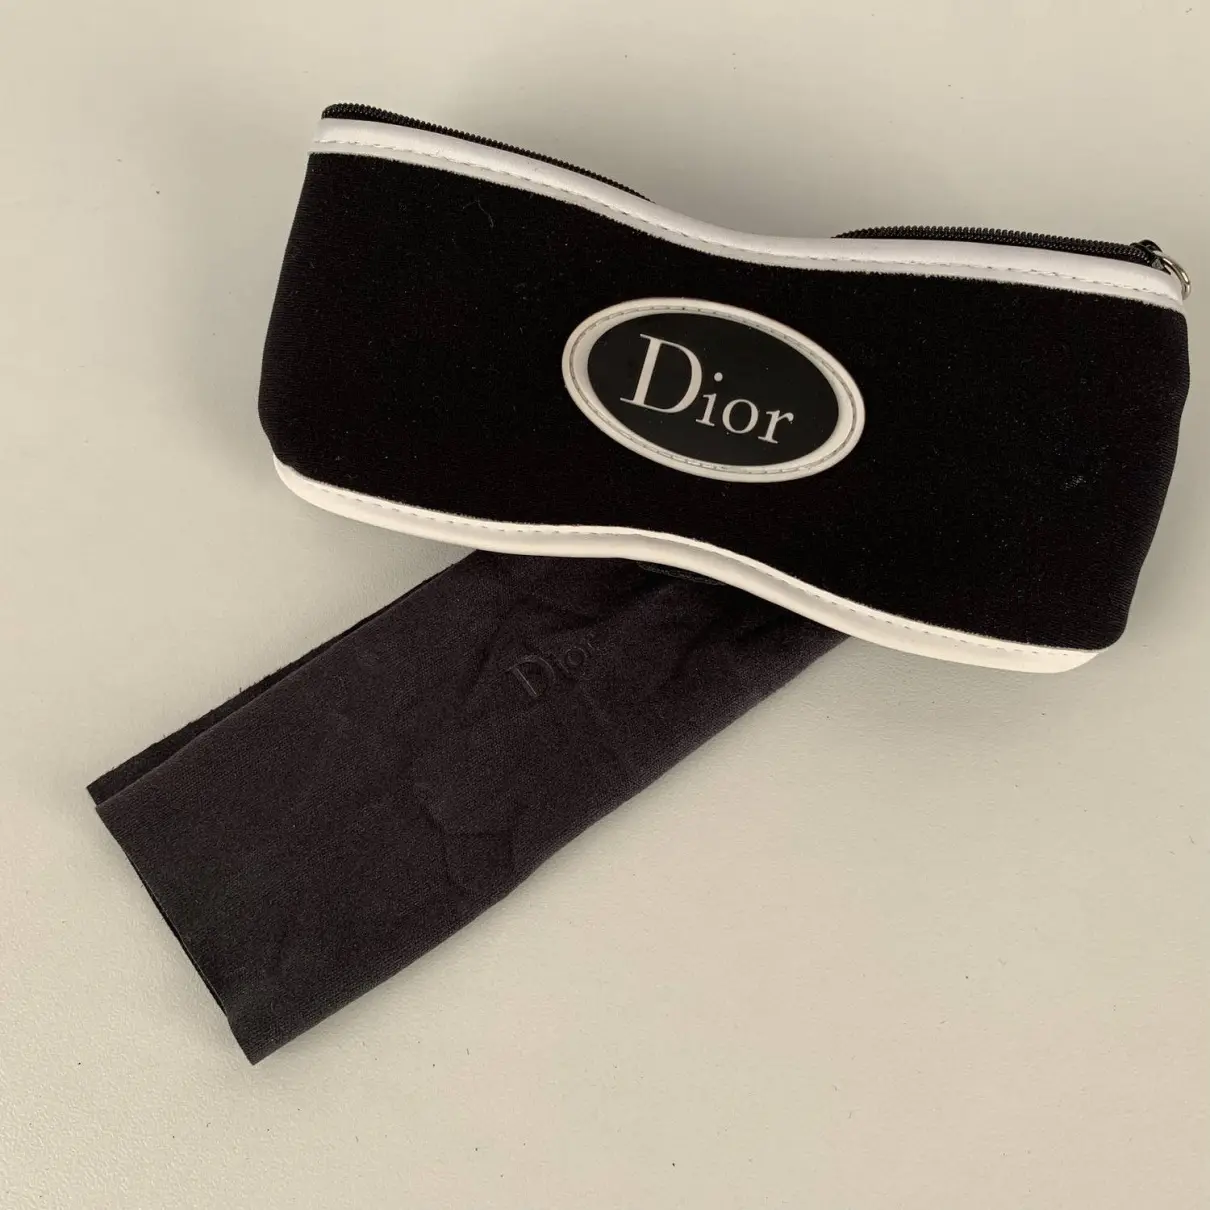 Dior Travel for sale